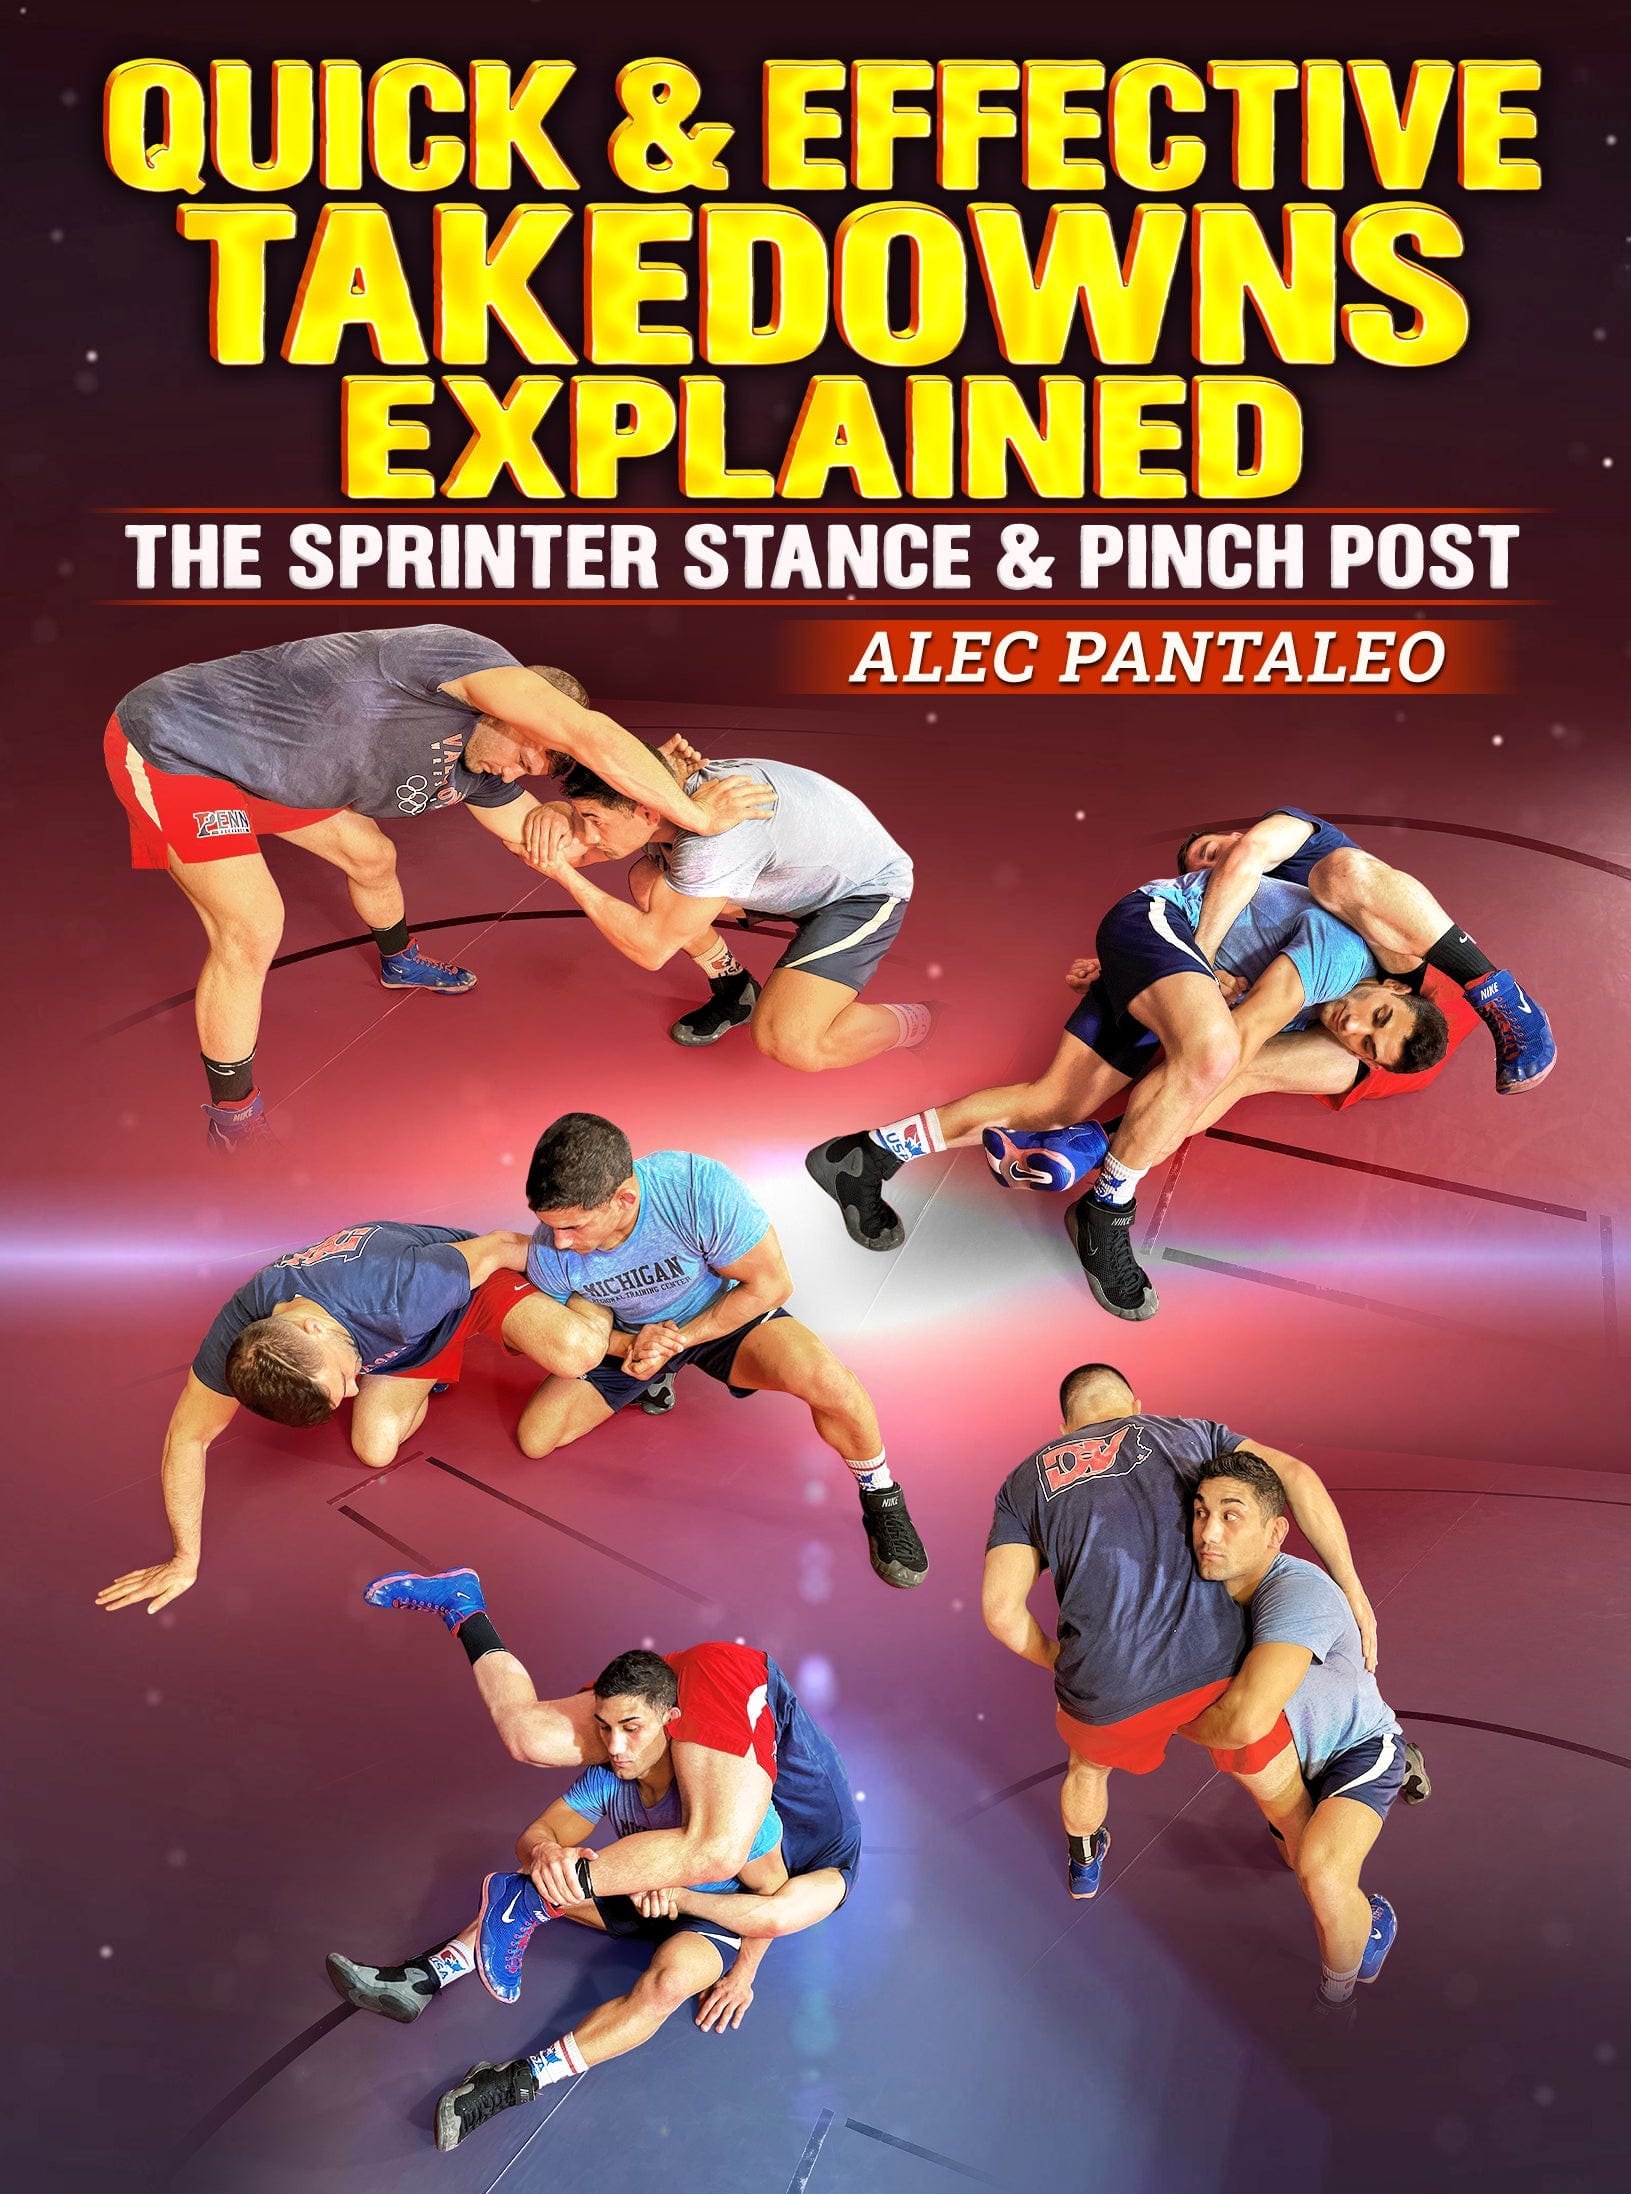 Quick & Effective Takedowns Explained by Alec Pantaleo - Fanatic Wrestling